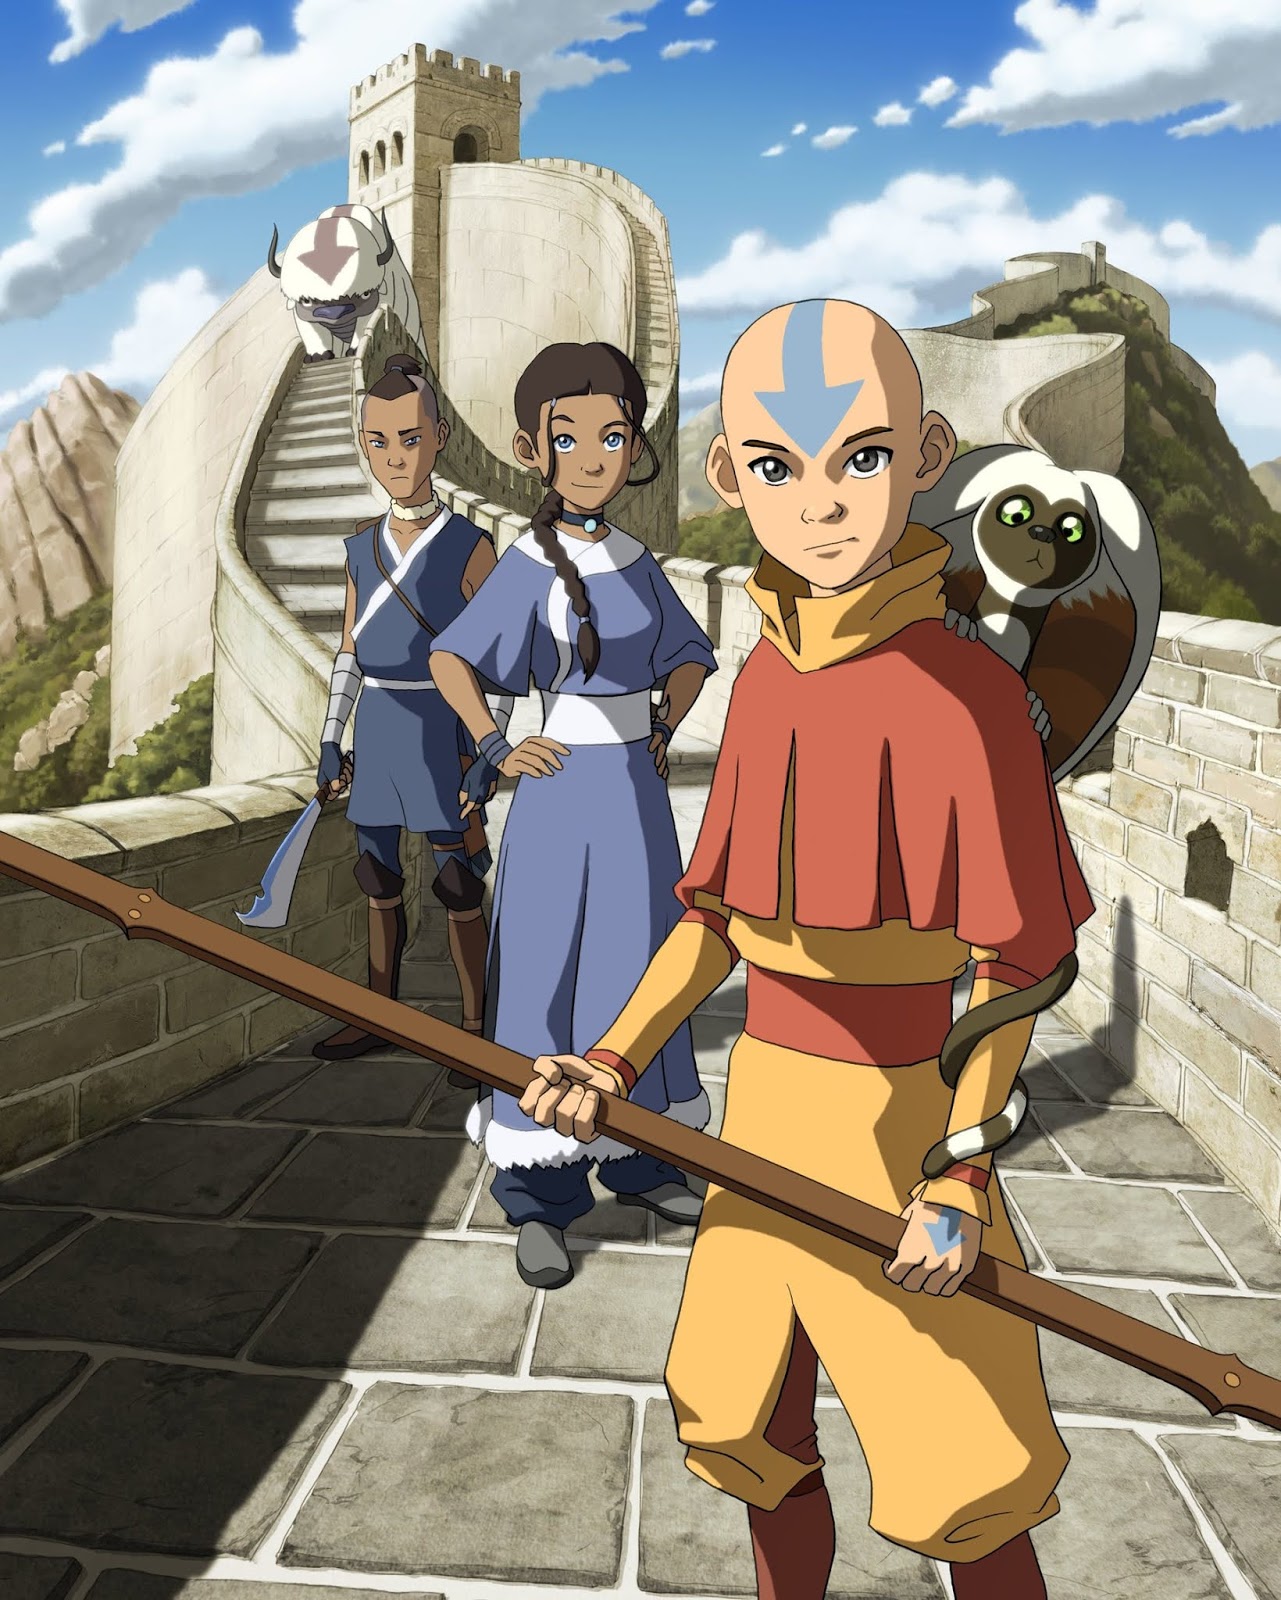 Nickalive ‘avatar The Last Airbender Imagines A World Free Of Whiteness